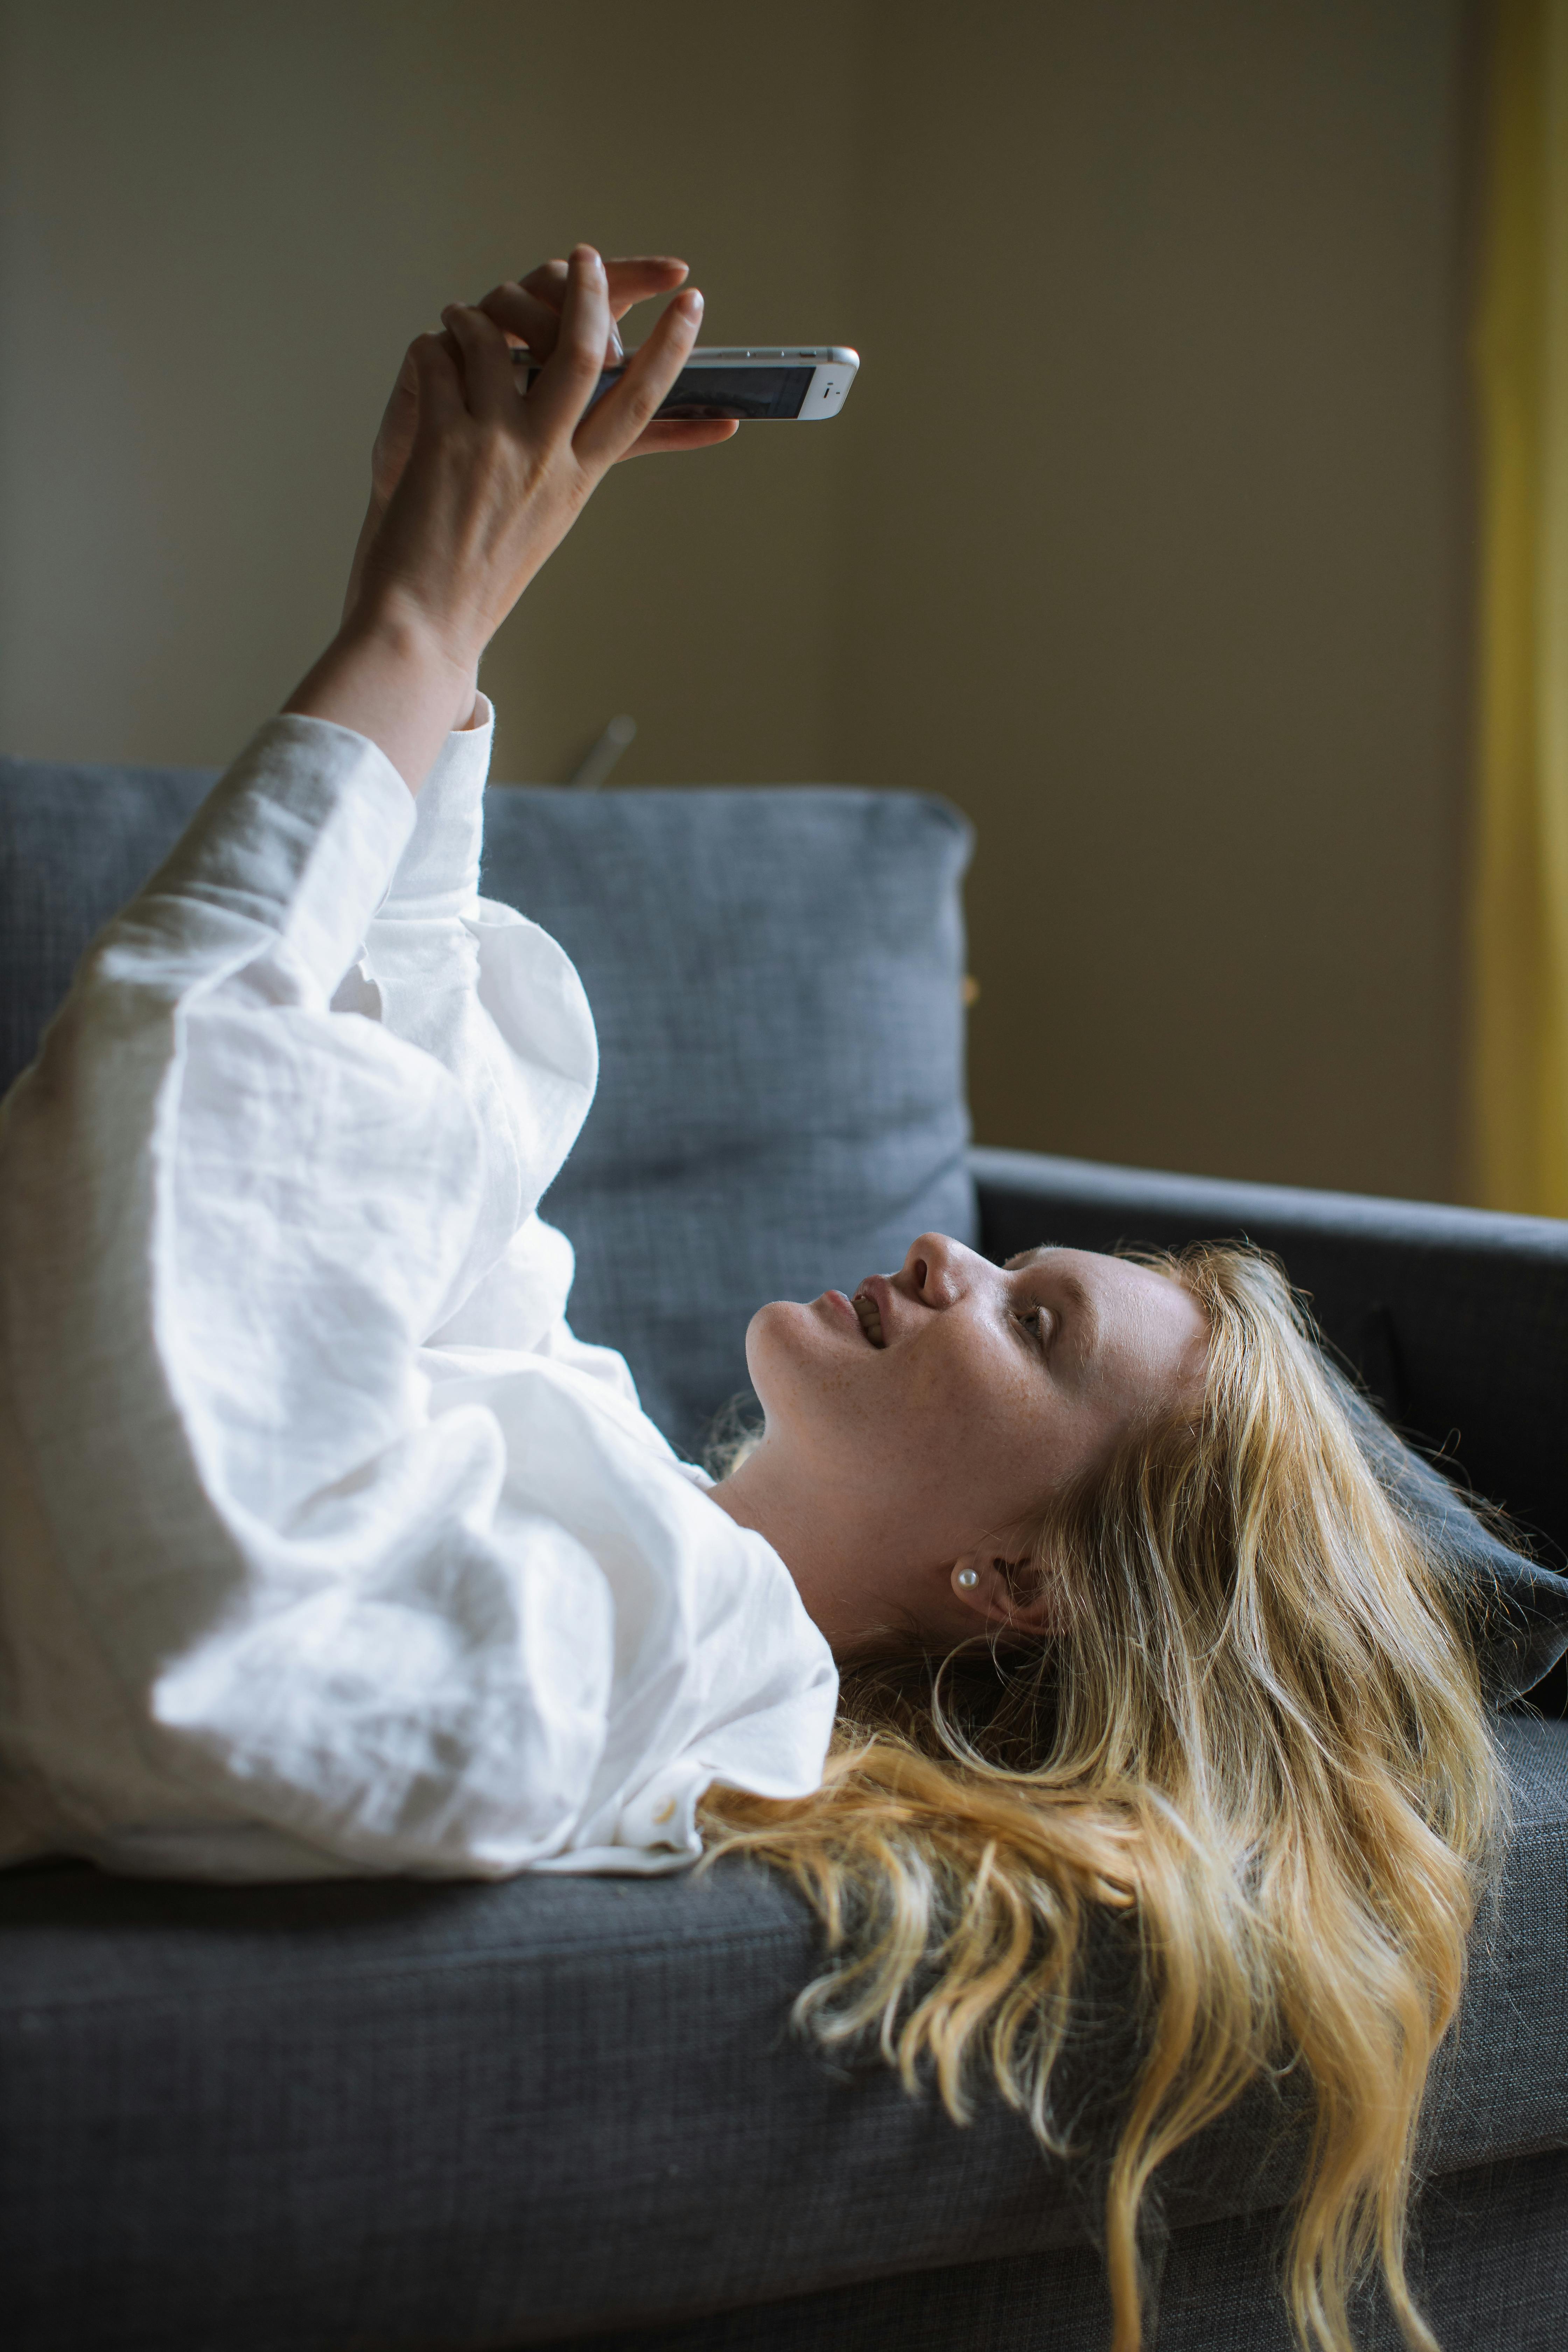 A happy woman using her phone | Source: Pexels